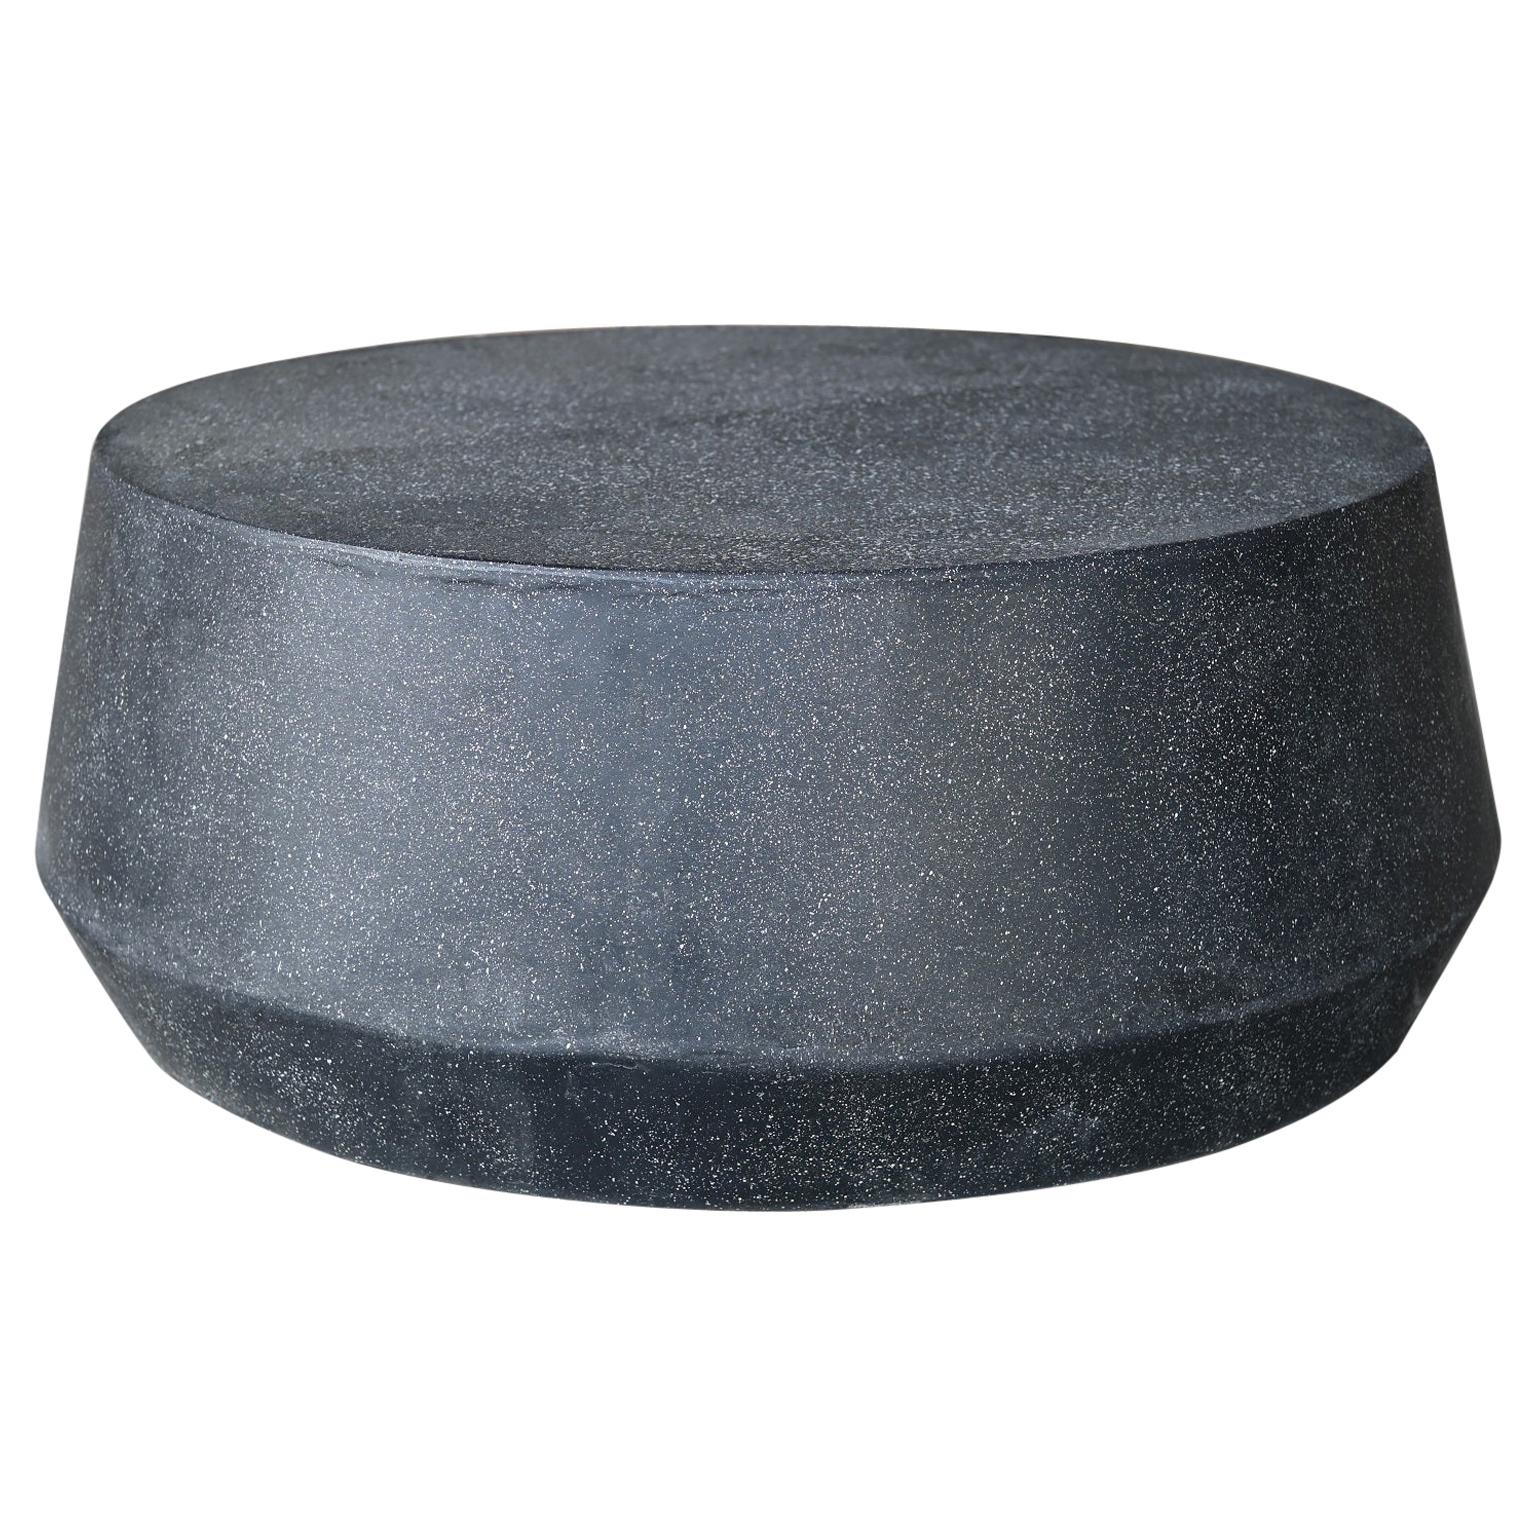 Cast Resin 'Tom' Low Table, Coal Stone Finish by Zachary A. Design For Sale